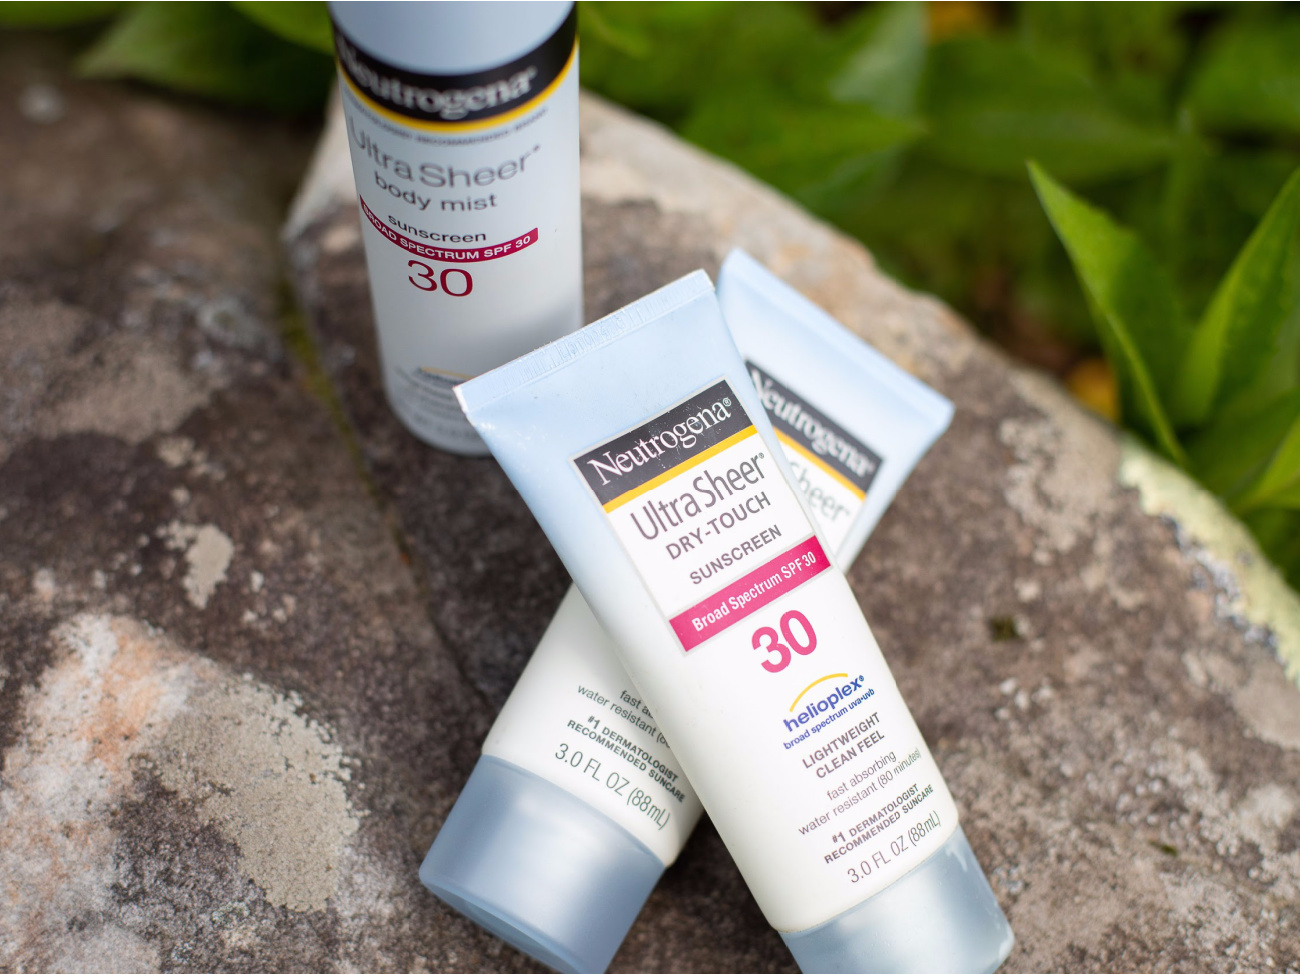 Neutrogena Sun Care Products As Low As $6.99 At Kroger (Regular Price Up To $10.99)